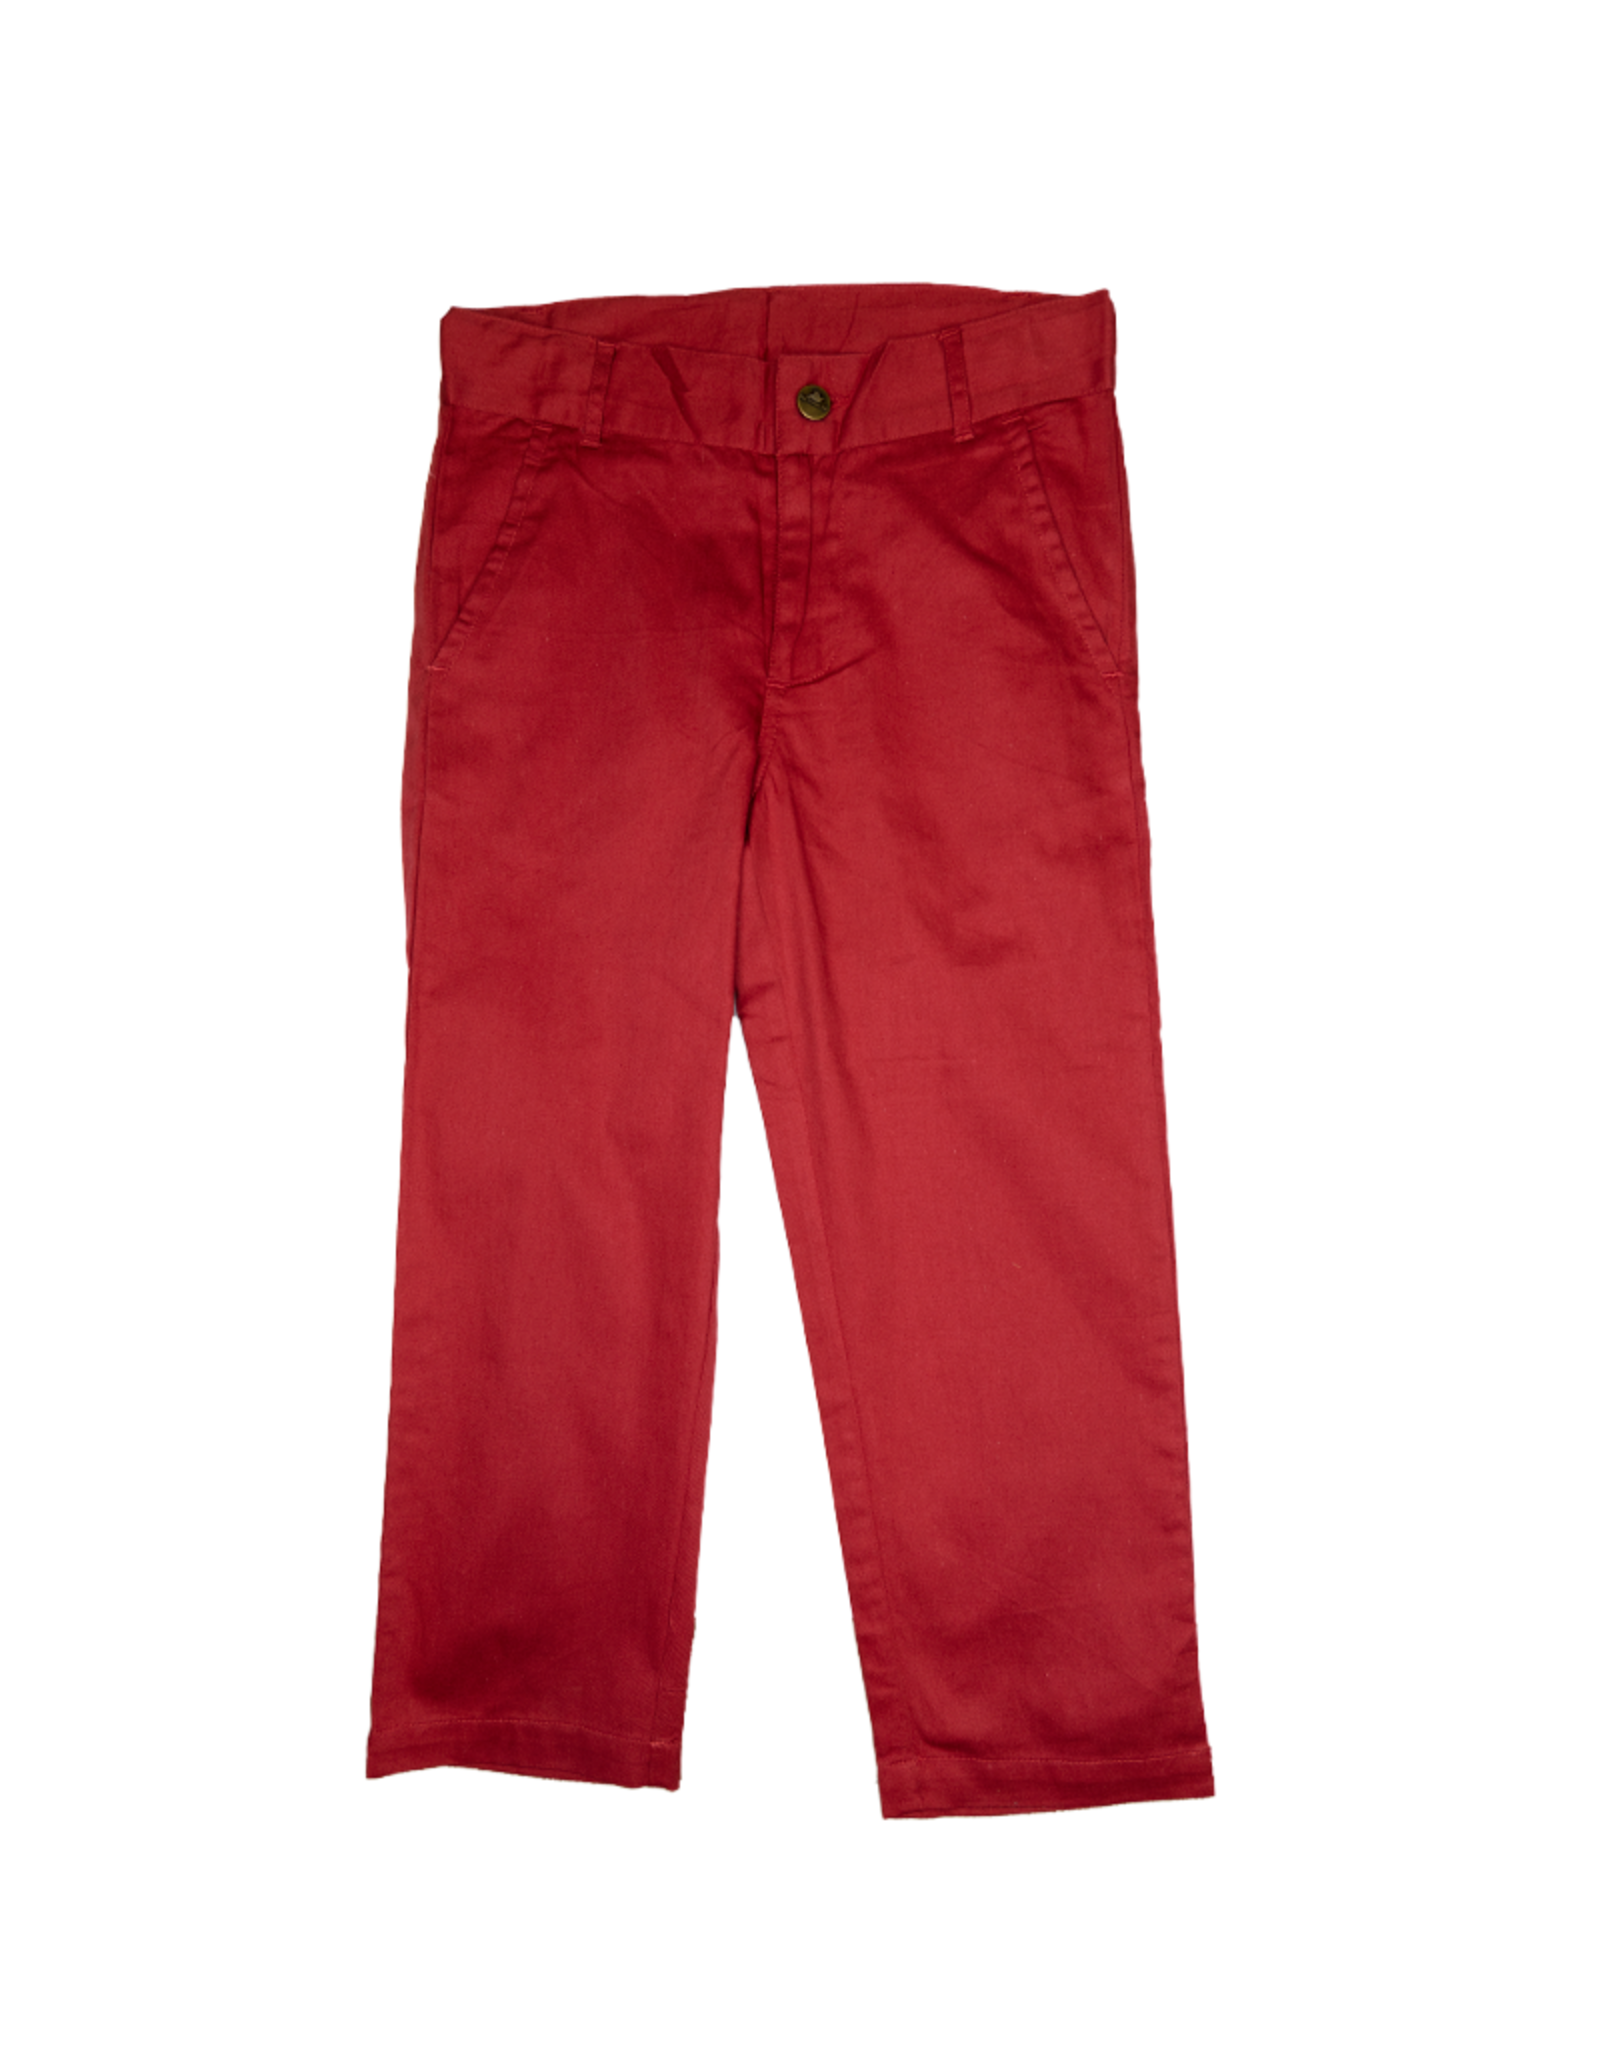 SouthBound Dress Pants Red - Spoiled Sweet Boutique - Spoiled Sweet ...